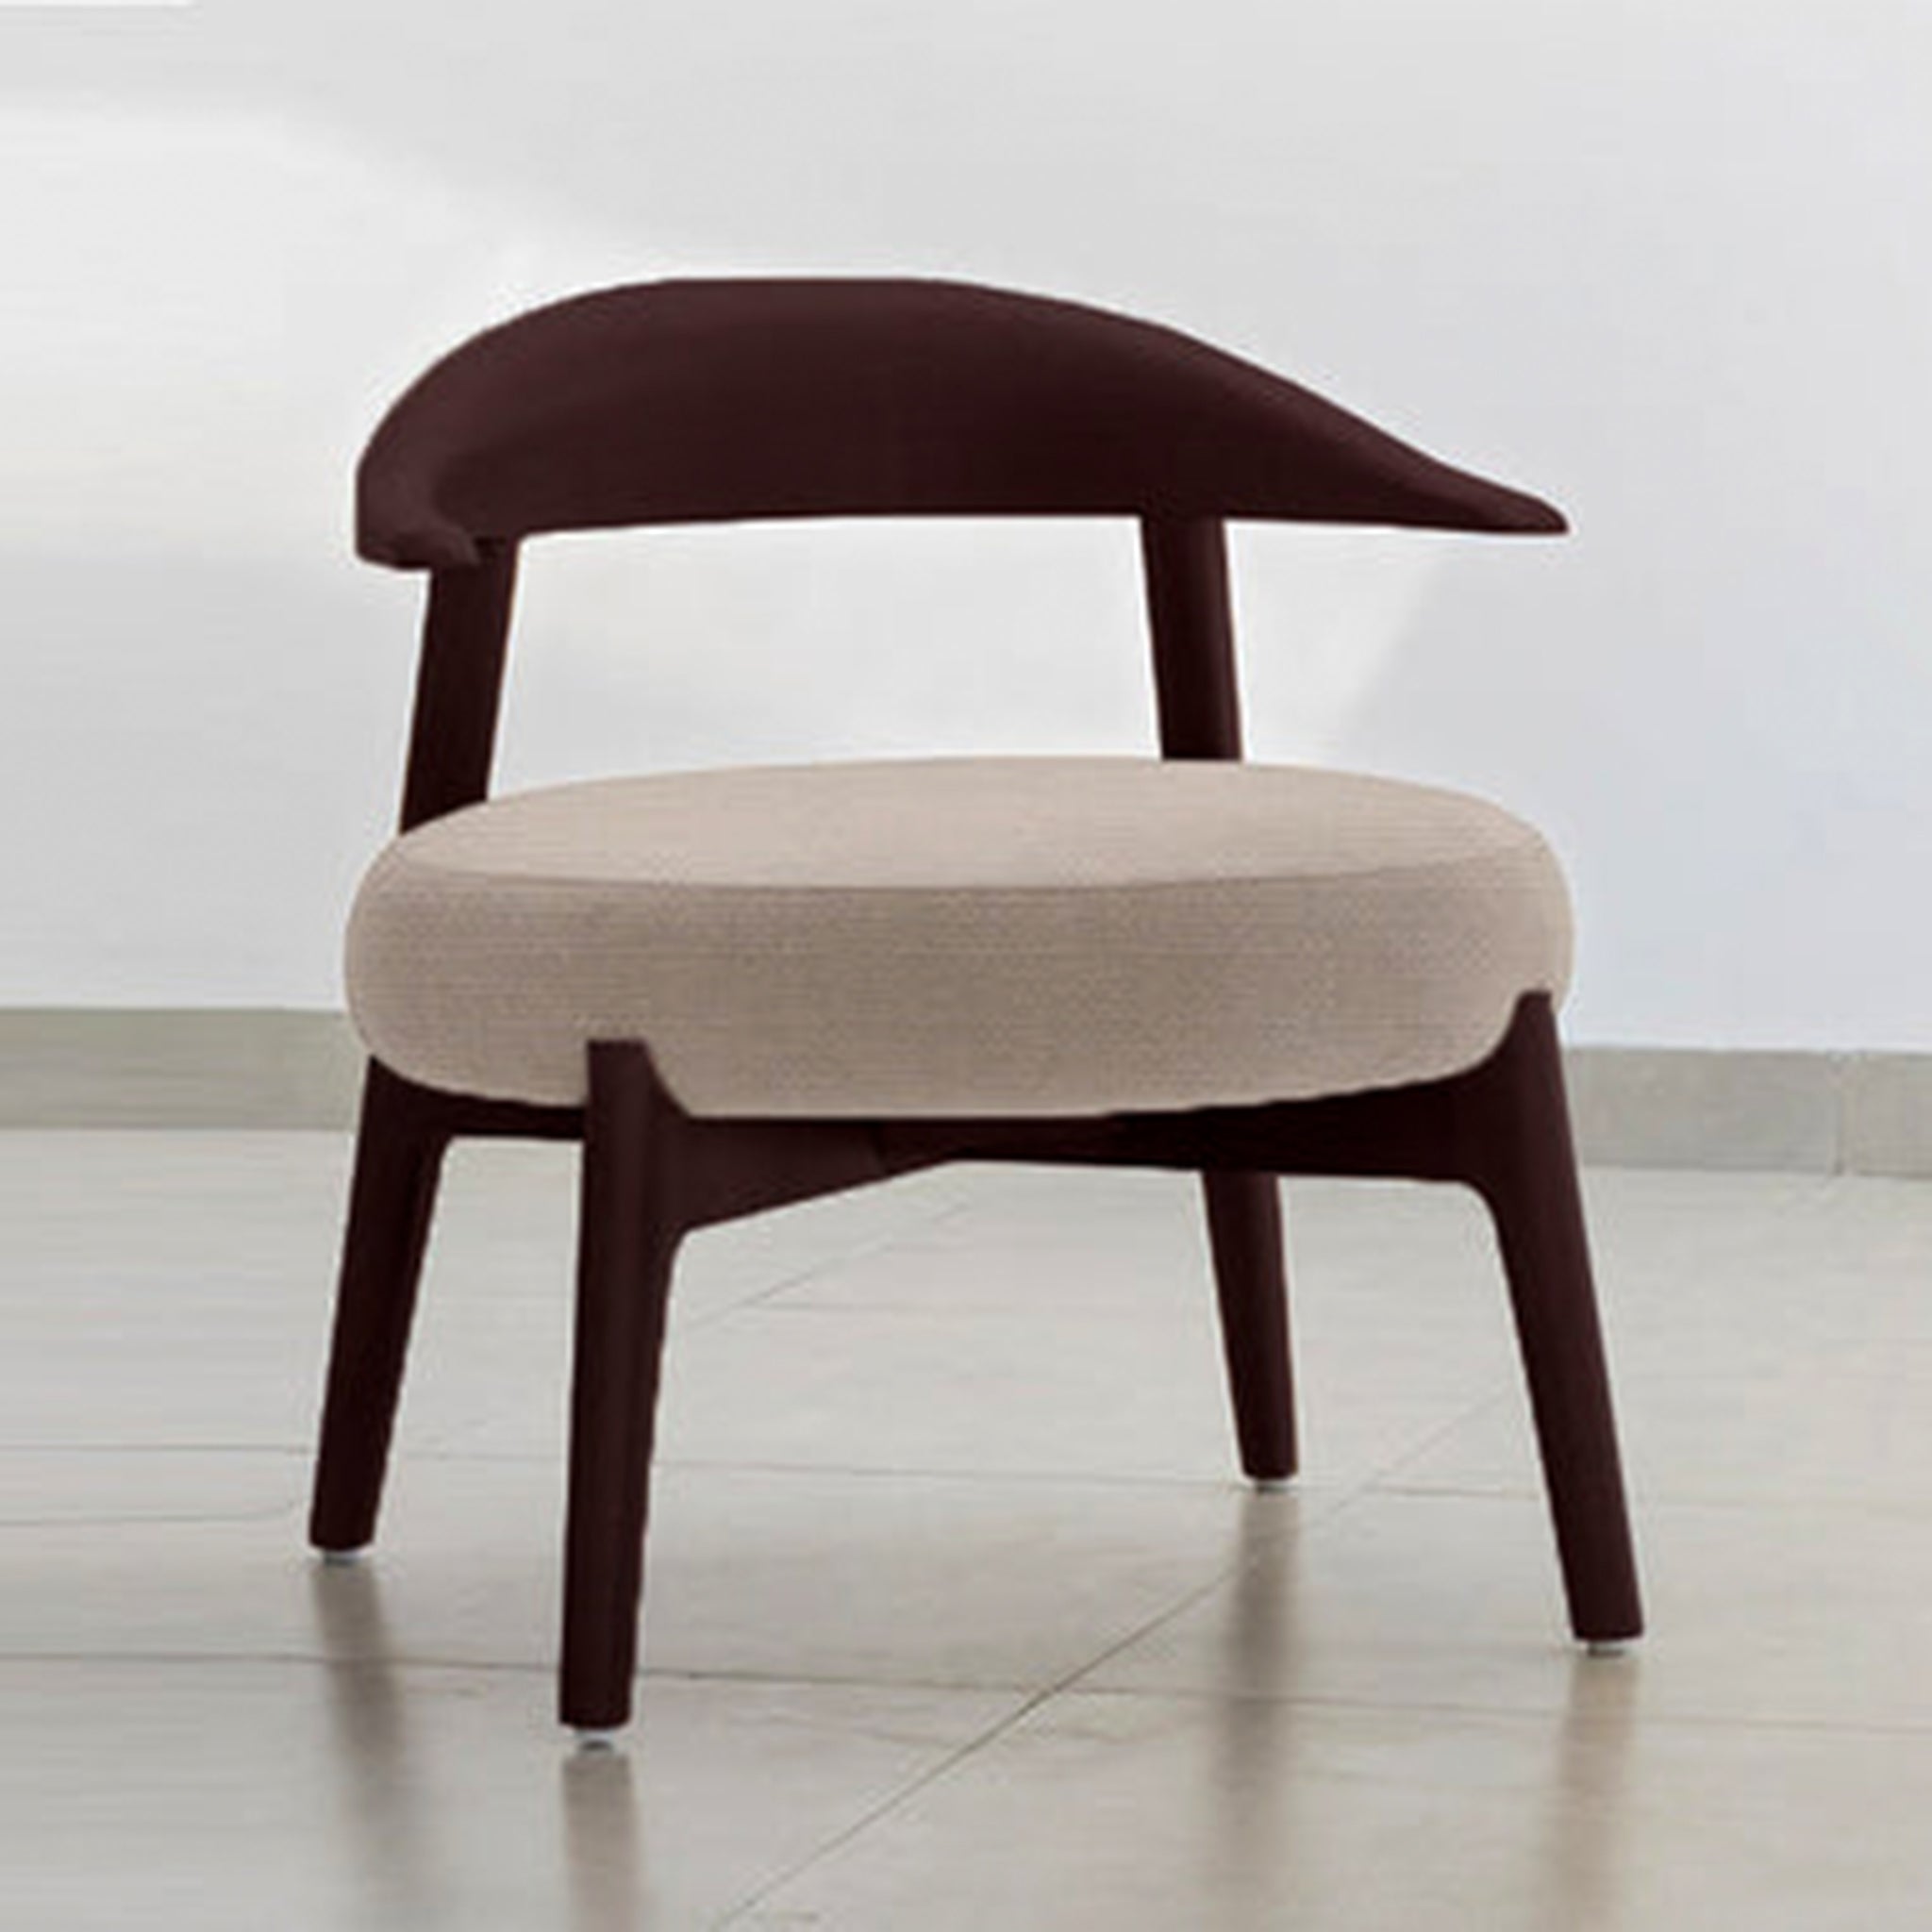 "Sophisticated and stylish Hyde Accent Chair for any interior"